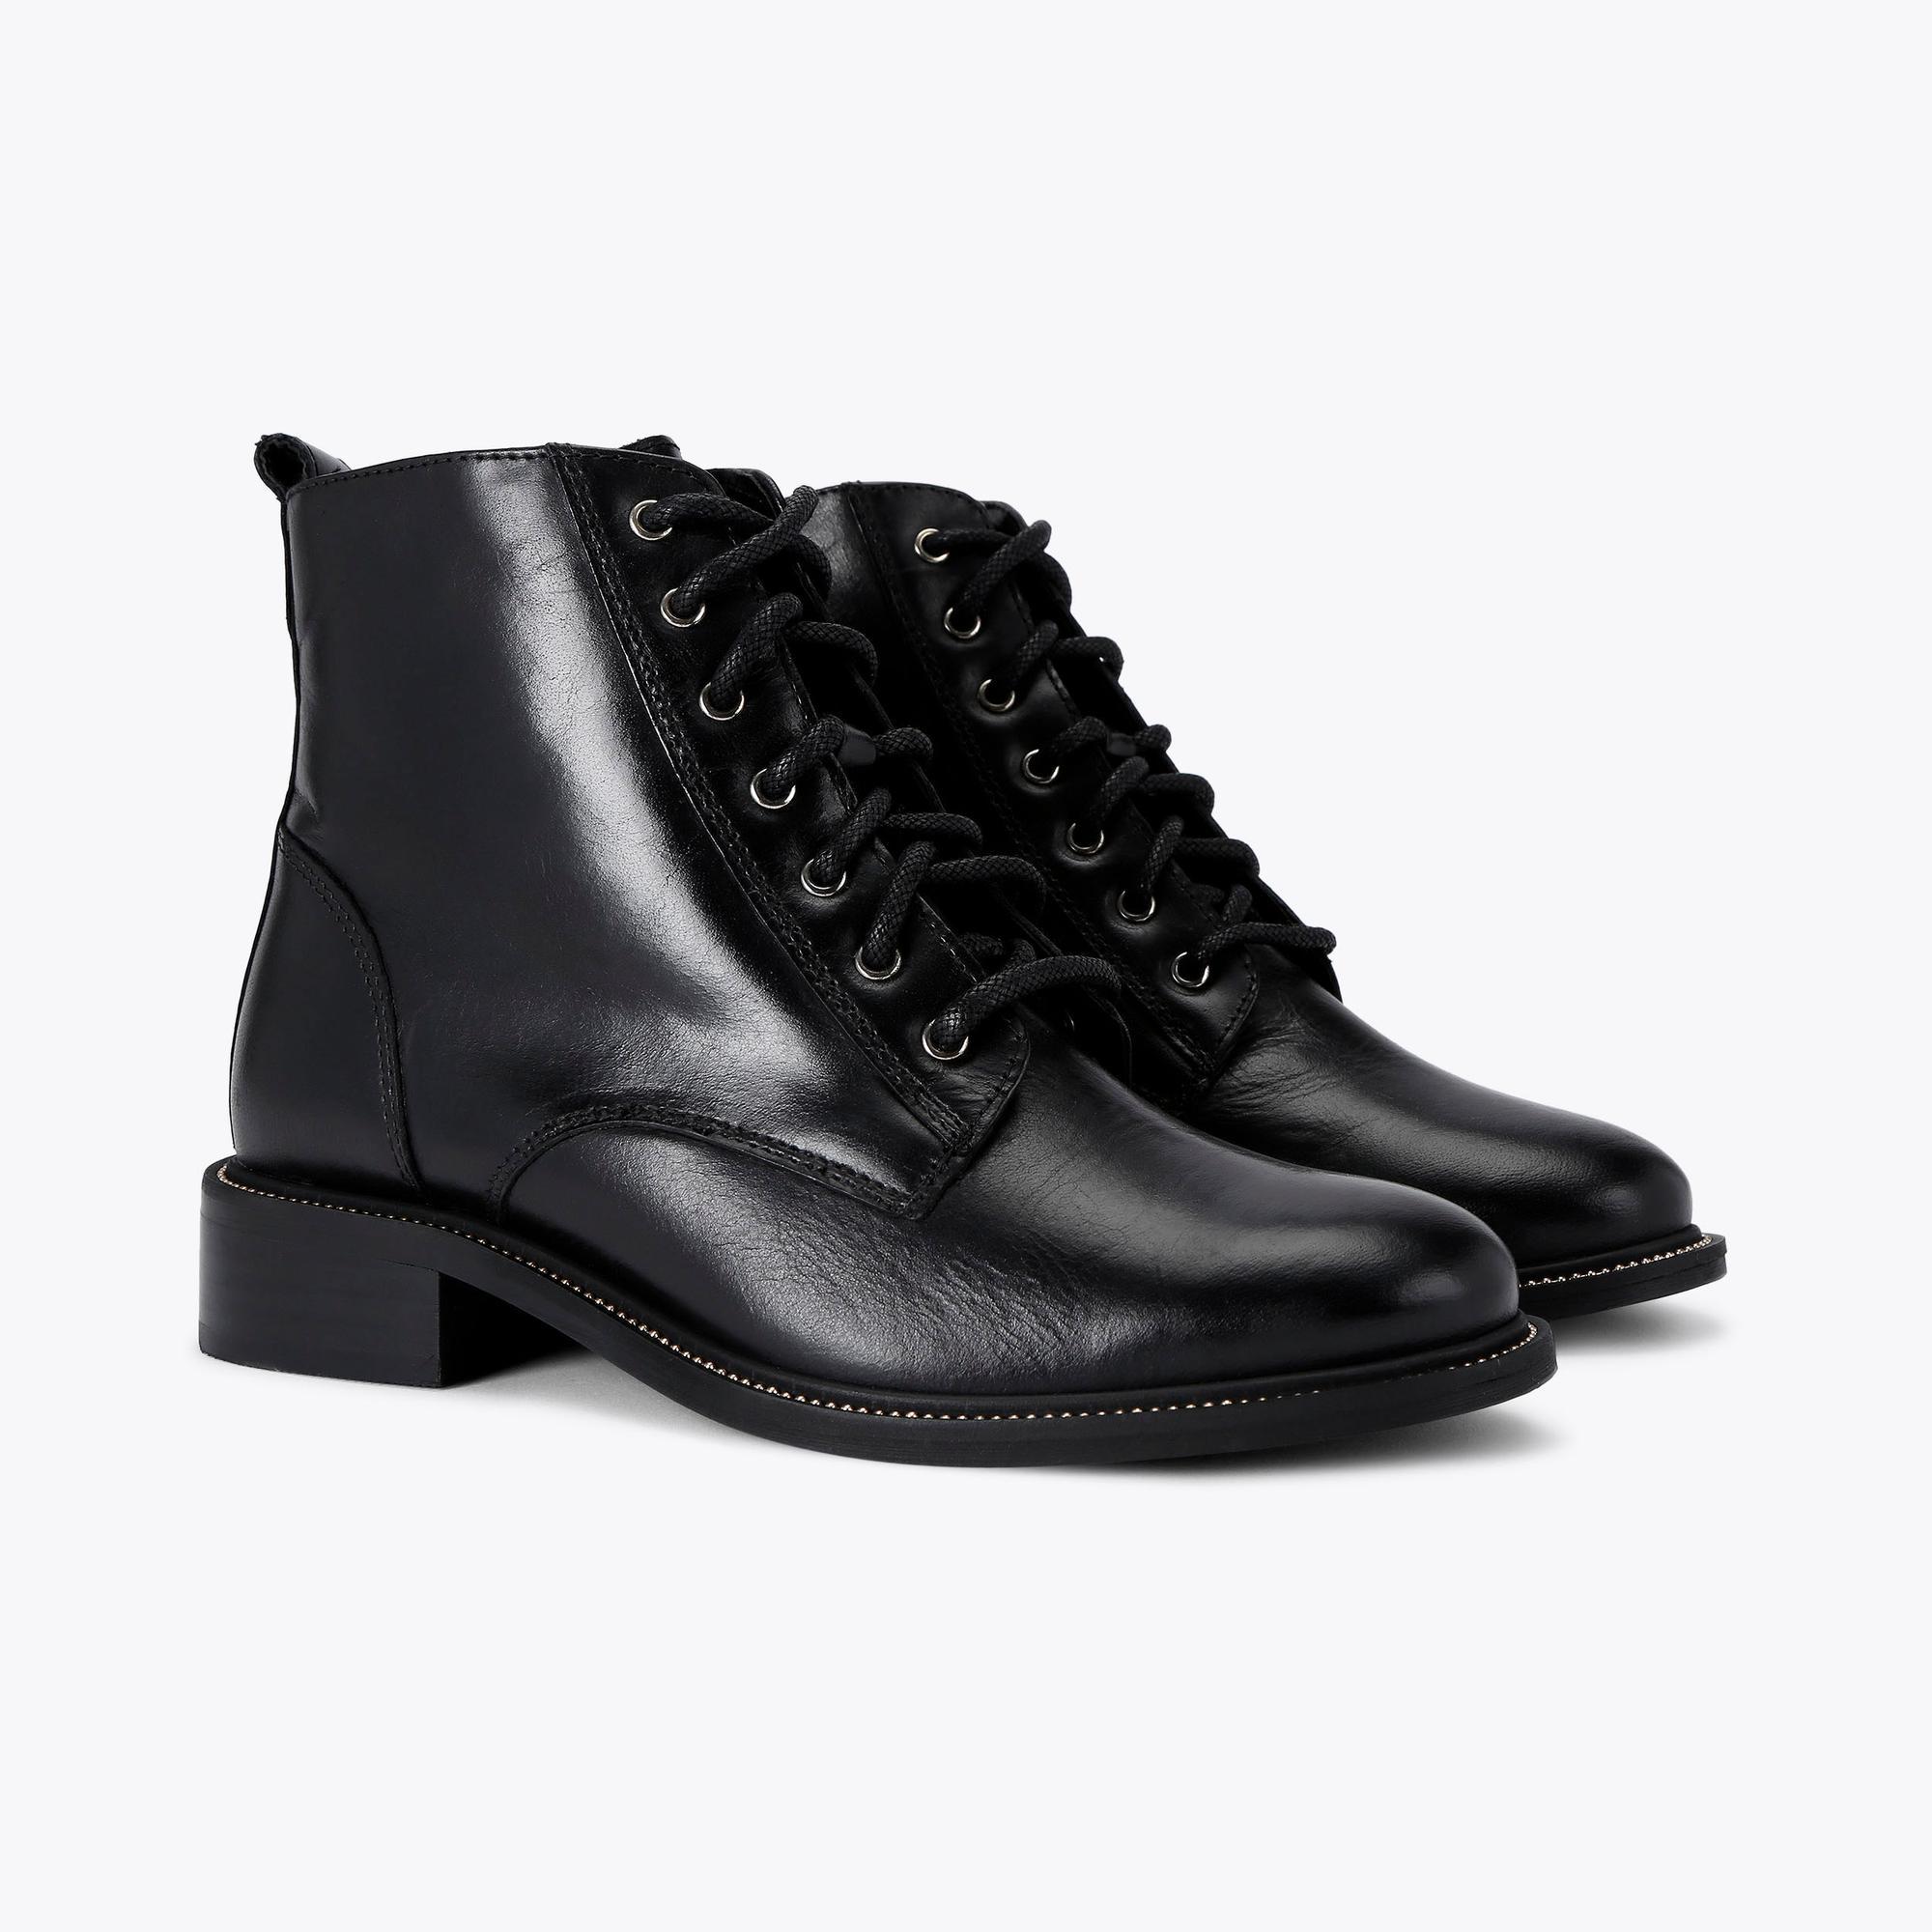 SPIKE Black Lace Up Ankle Boots by CARVELA